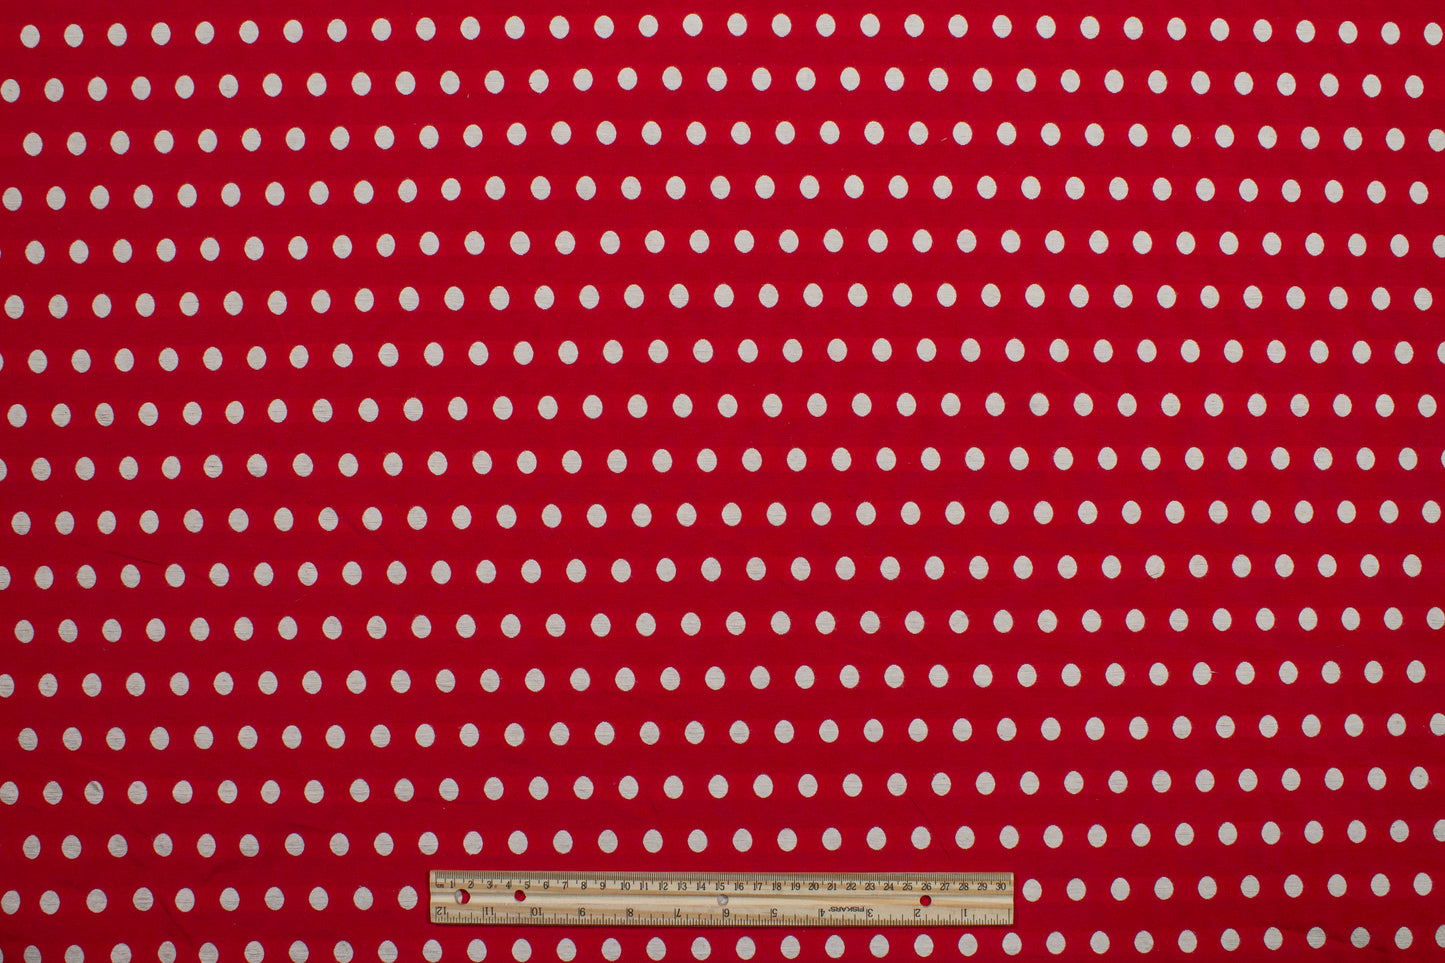 Polak Dot Cotton Brocade - Red and White